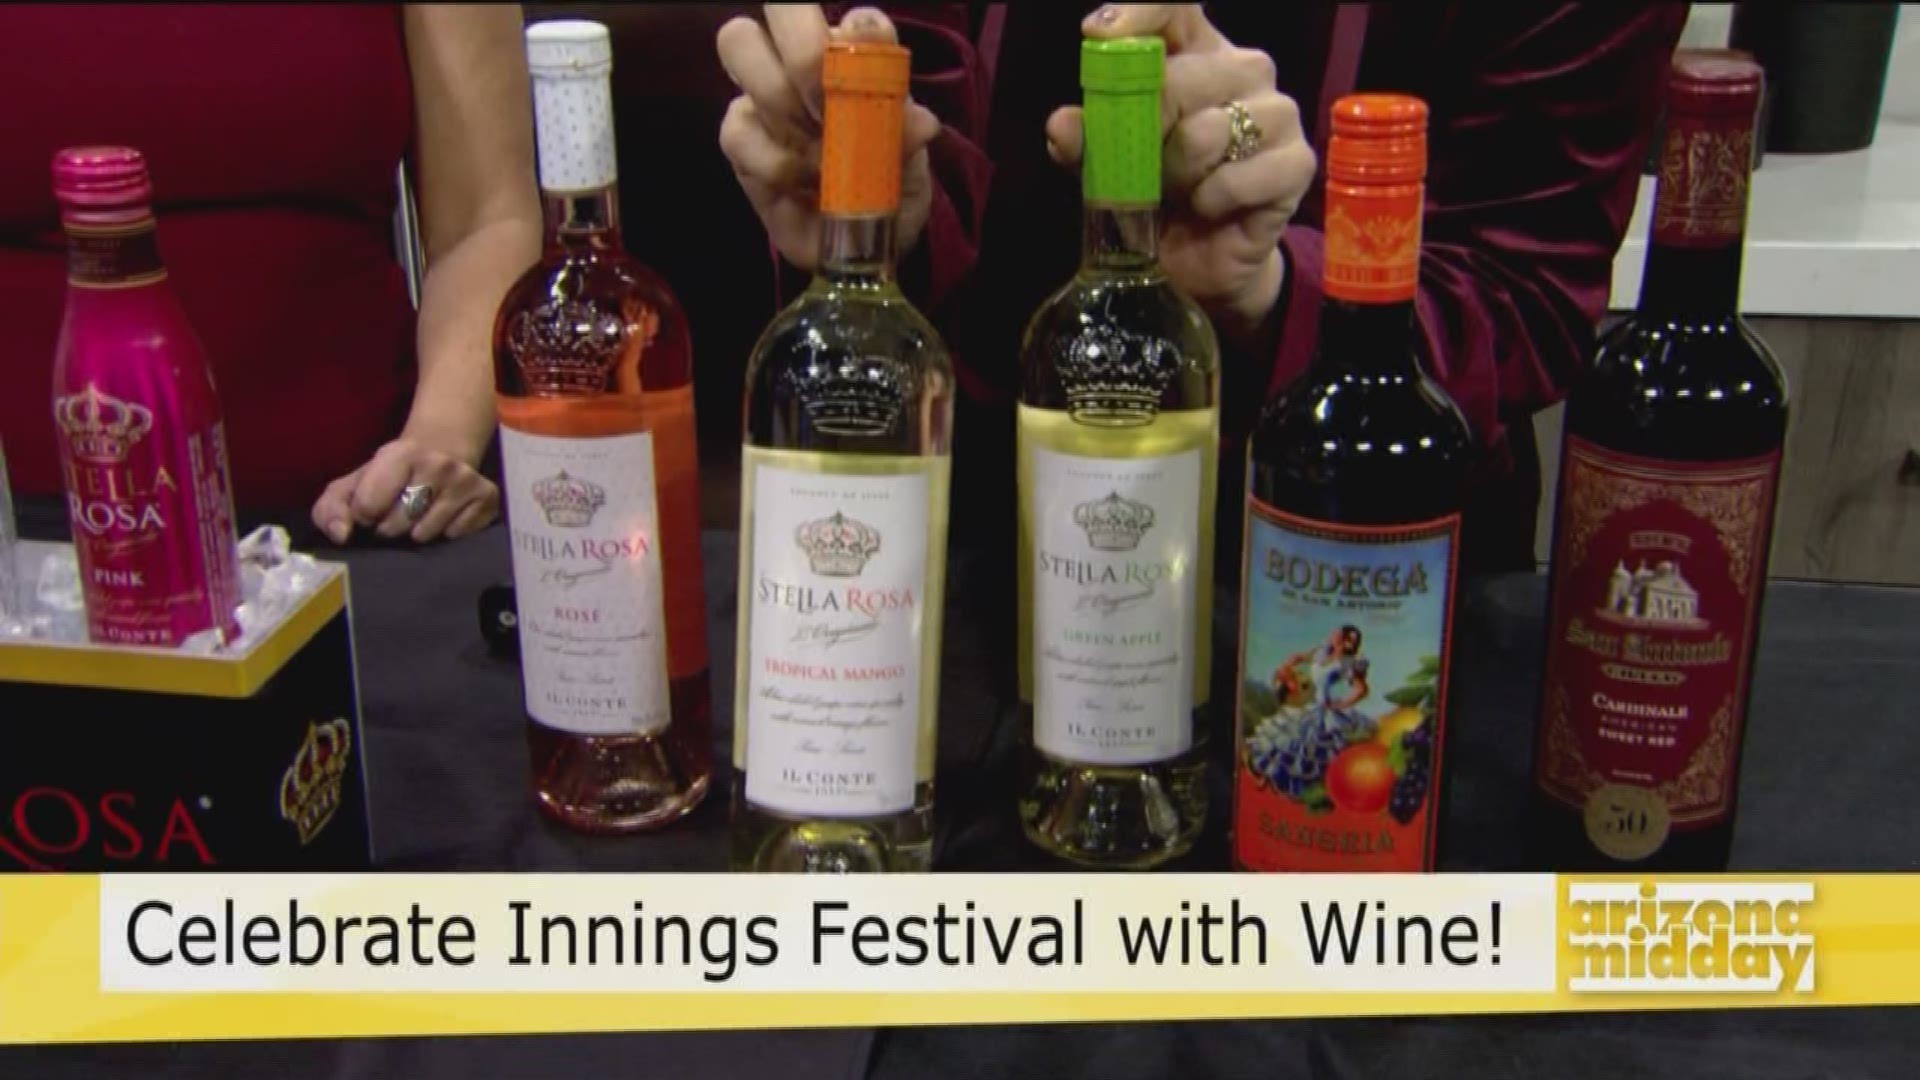 Riboli Wines' Melissa Gonzalo gives us the scoop on the official wine of the Innings Festival and how the winery was ranked Best in the Country